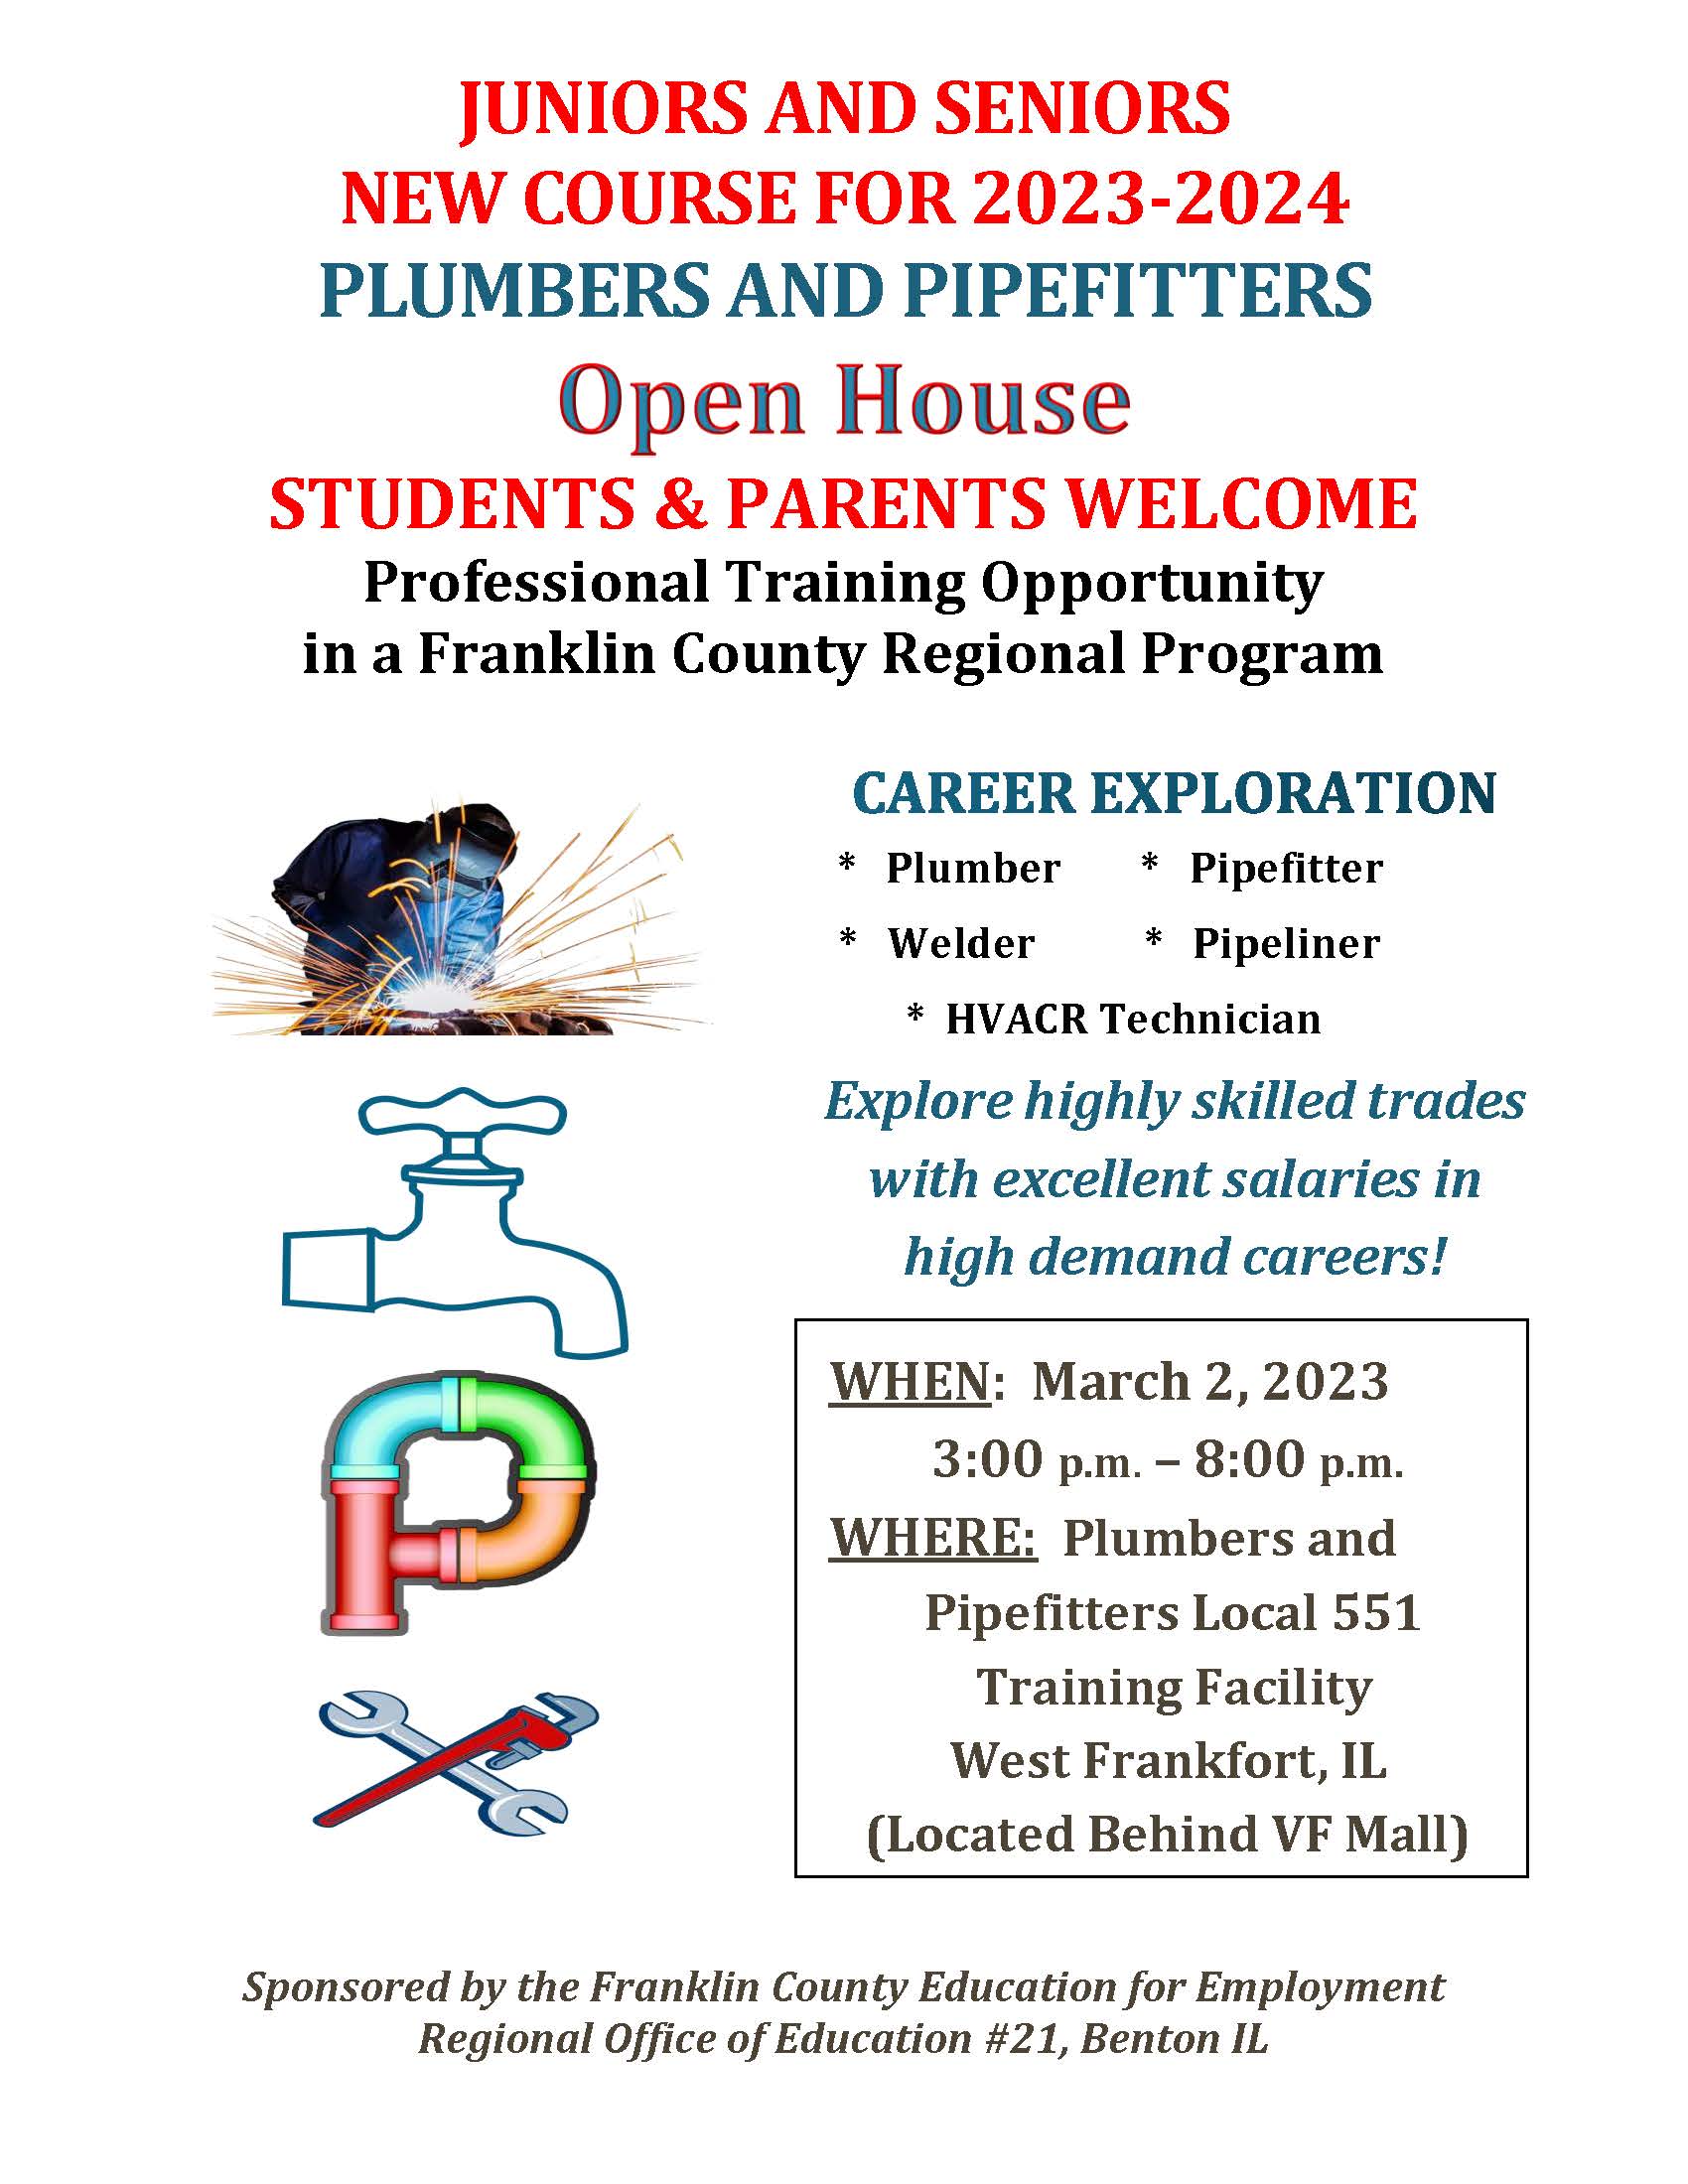 Plumbers & Pipefitters Open House Flyer